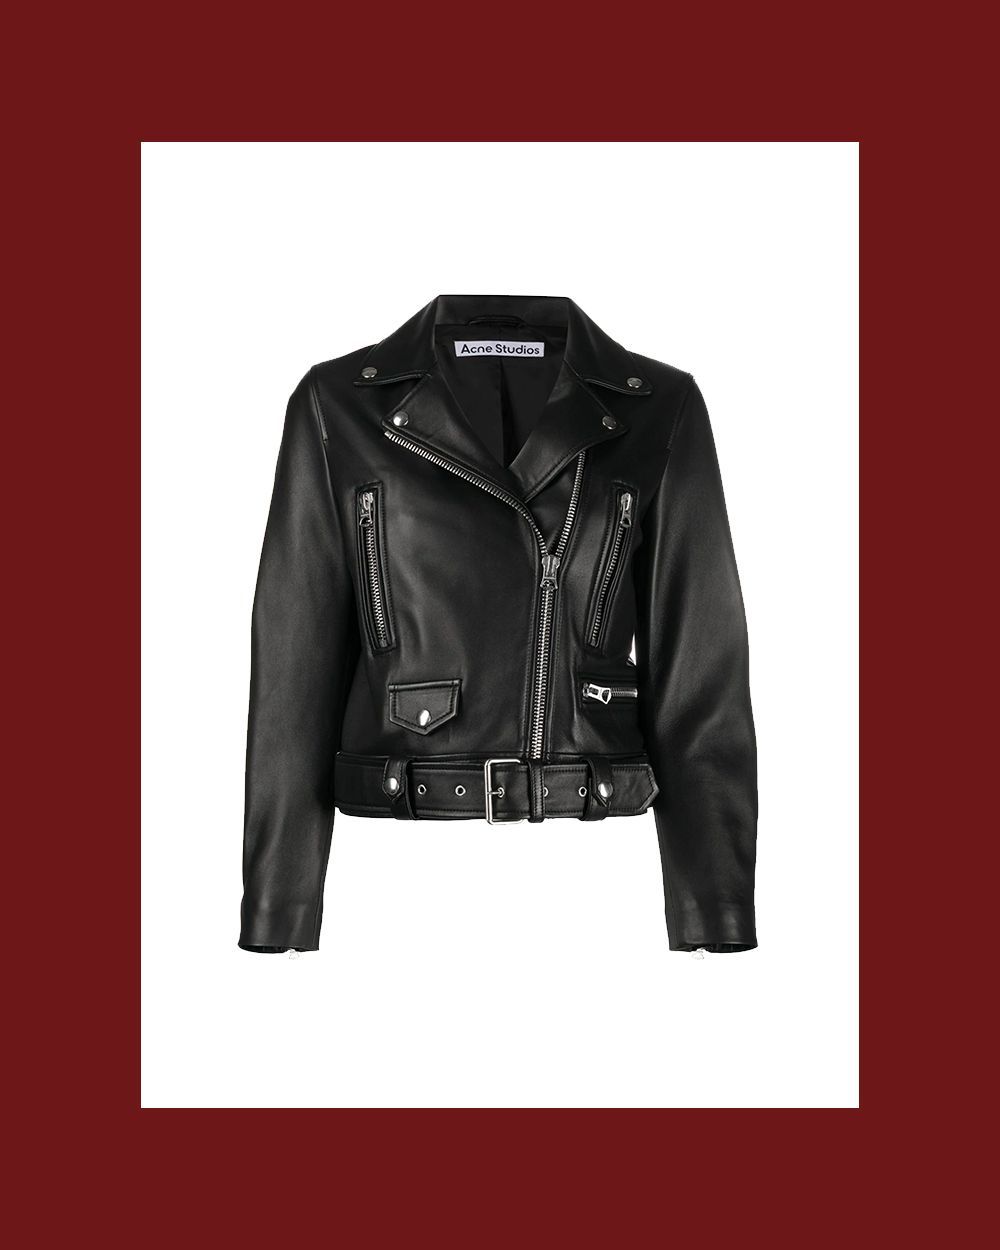 Moto Jacket: Classic, Chic and Edgy | Stylemydreams.com